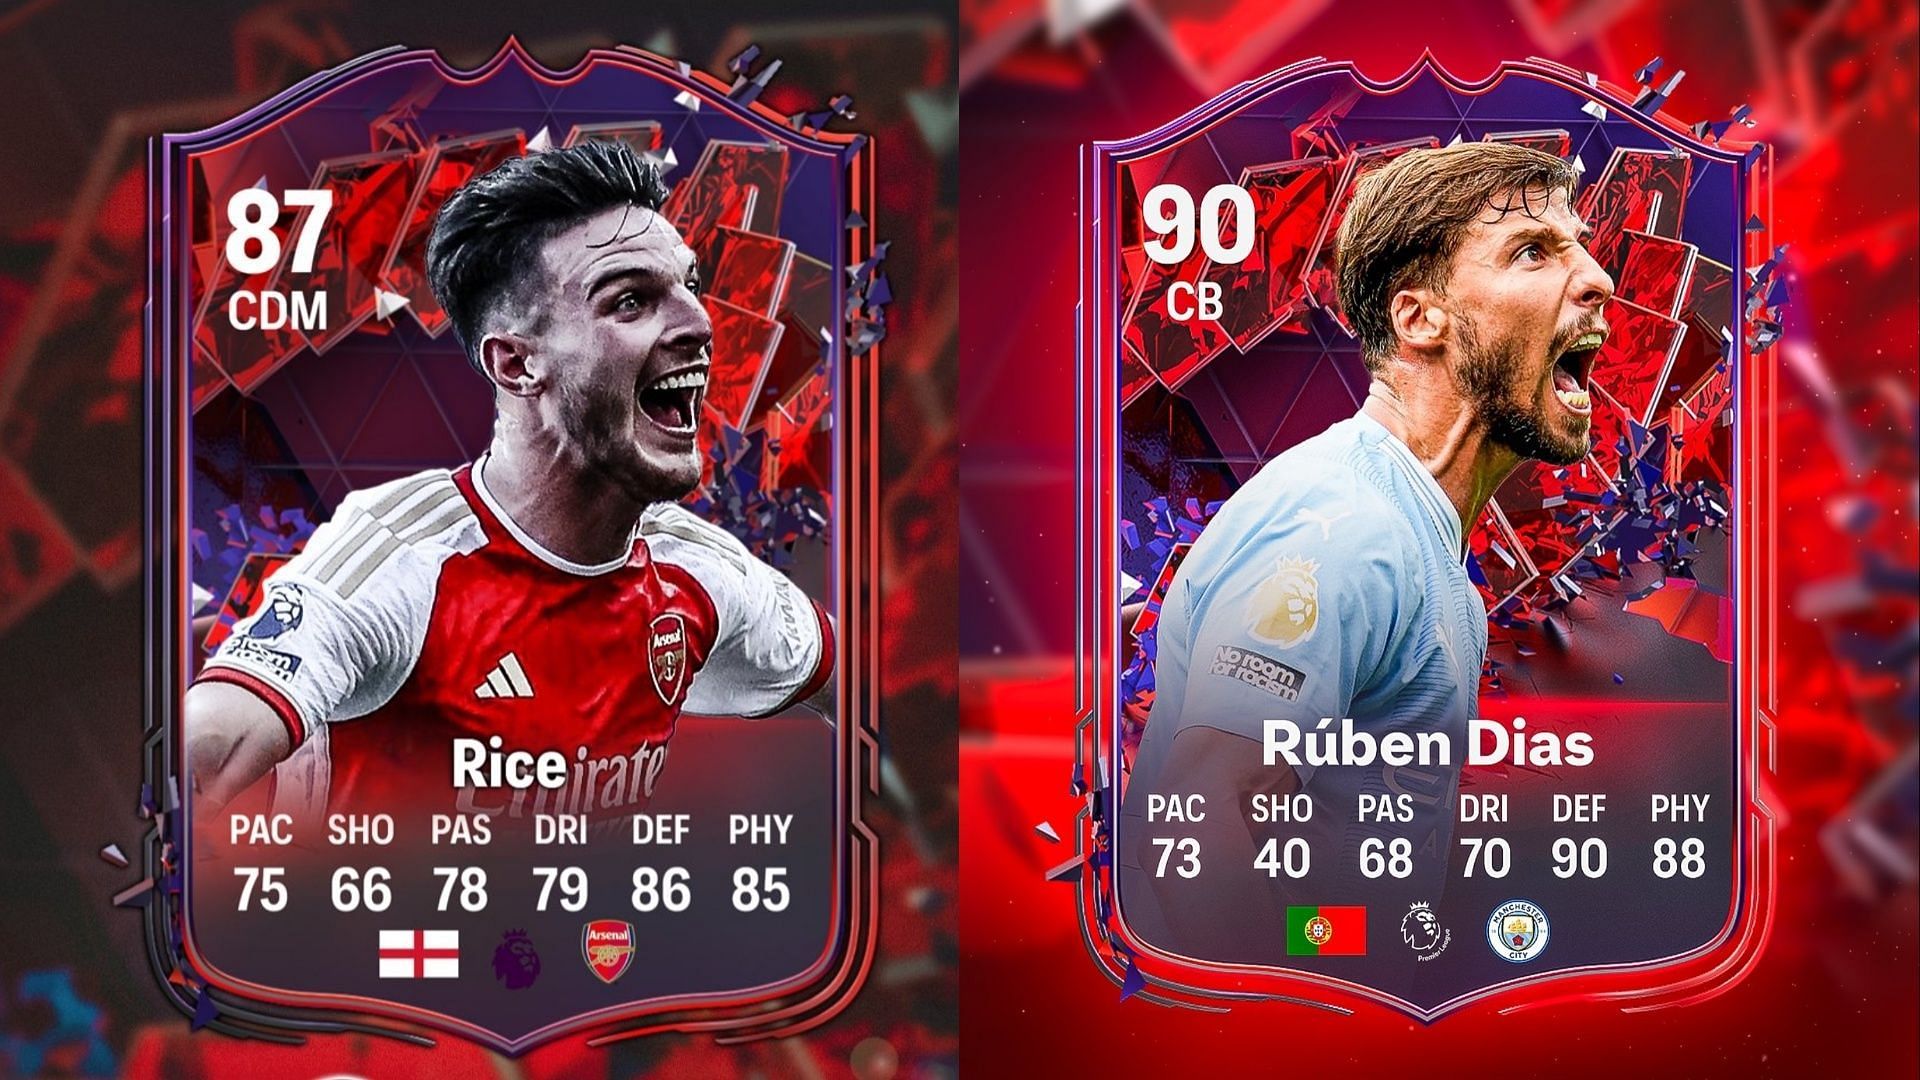 Two new Trailblazers cards from the Premier League have been leaked (Images via Twitter/FTR, FUT Sheriff)